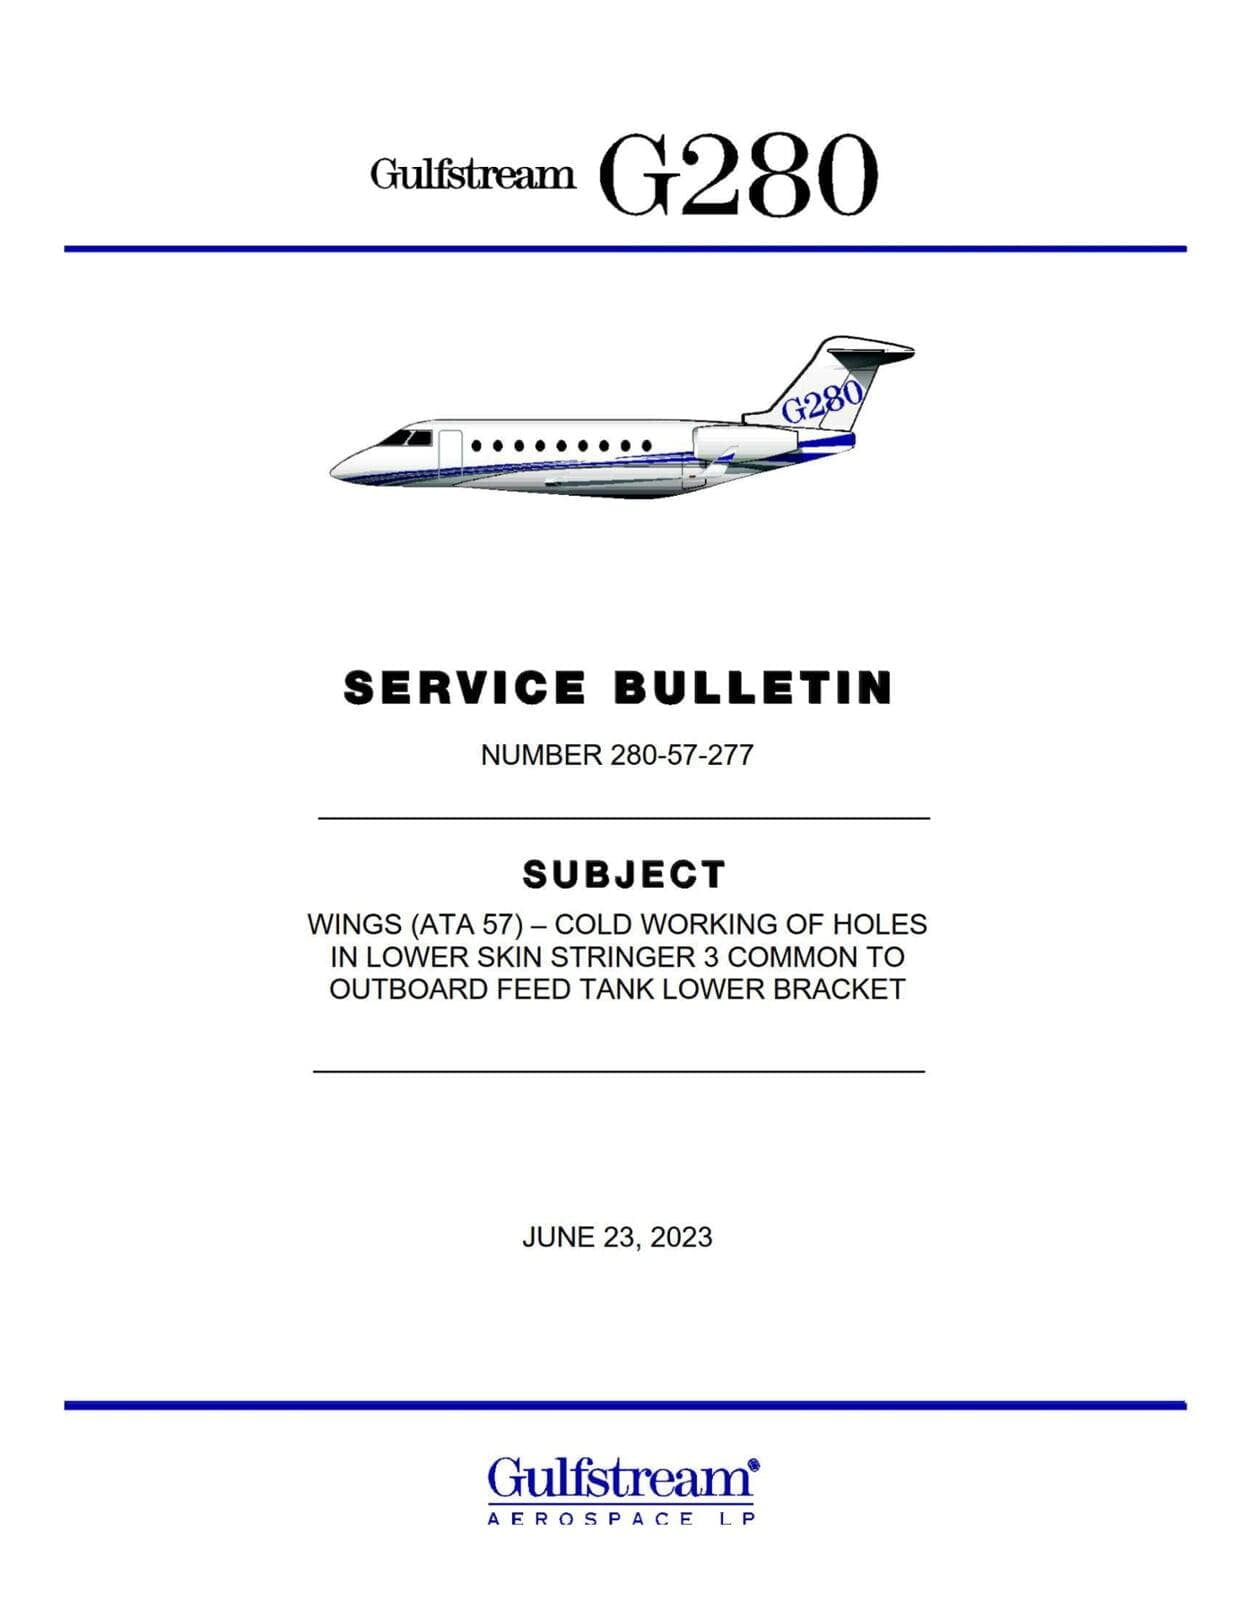 Gulfstream G280 Service Bulletin Due to 'Insufficiently Fatigue Resistant Design'